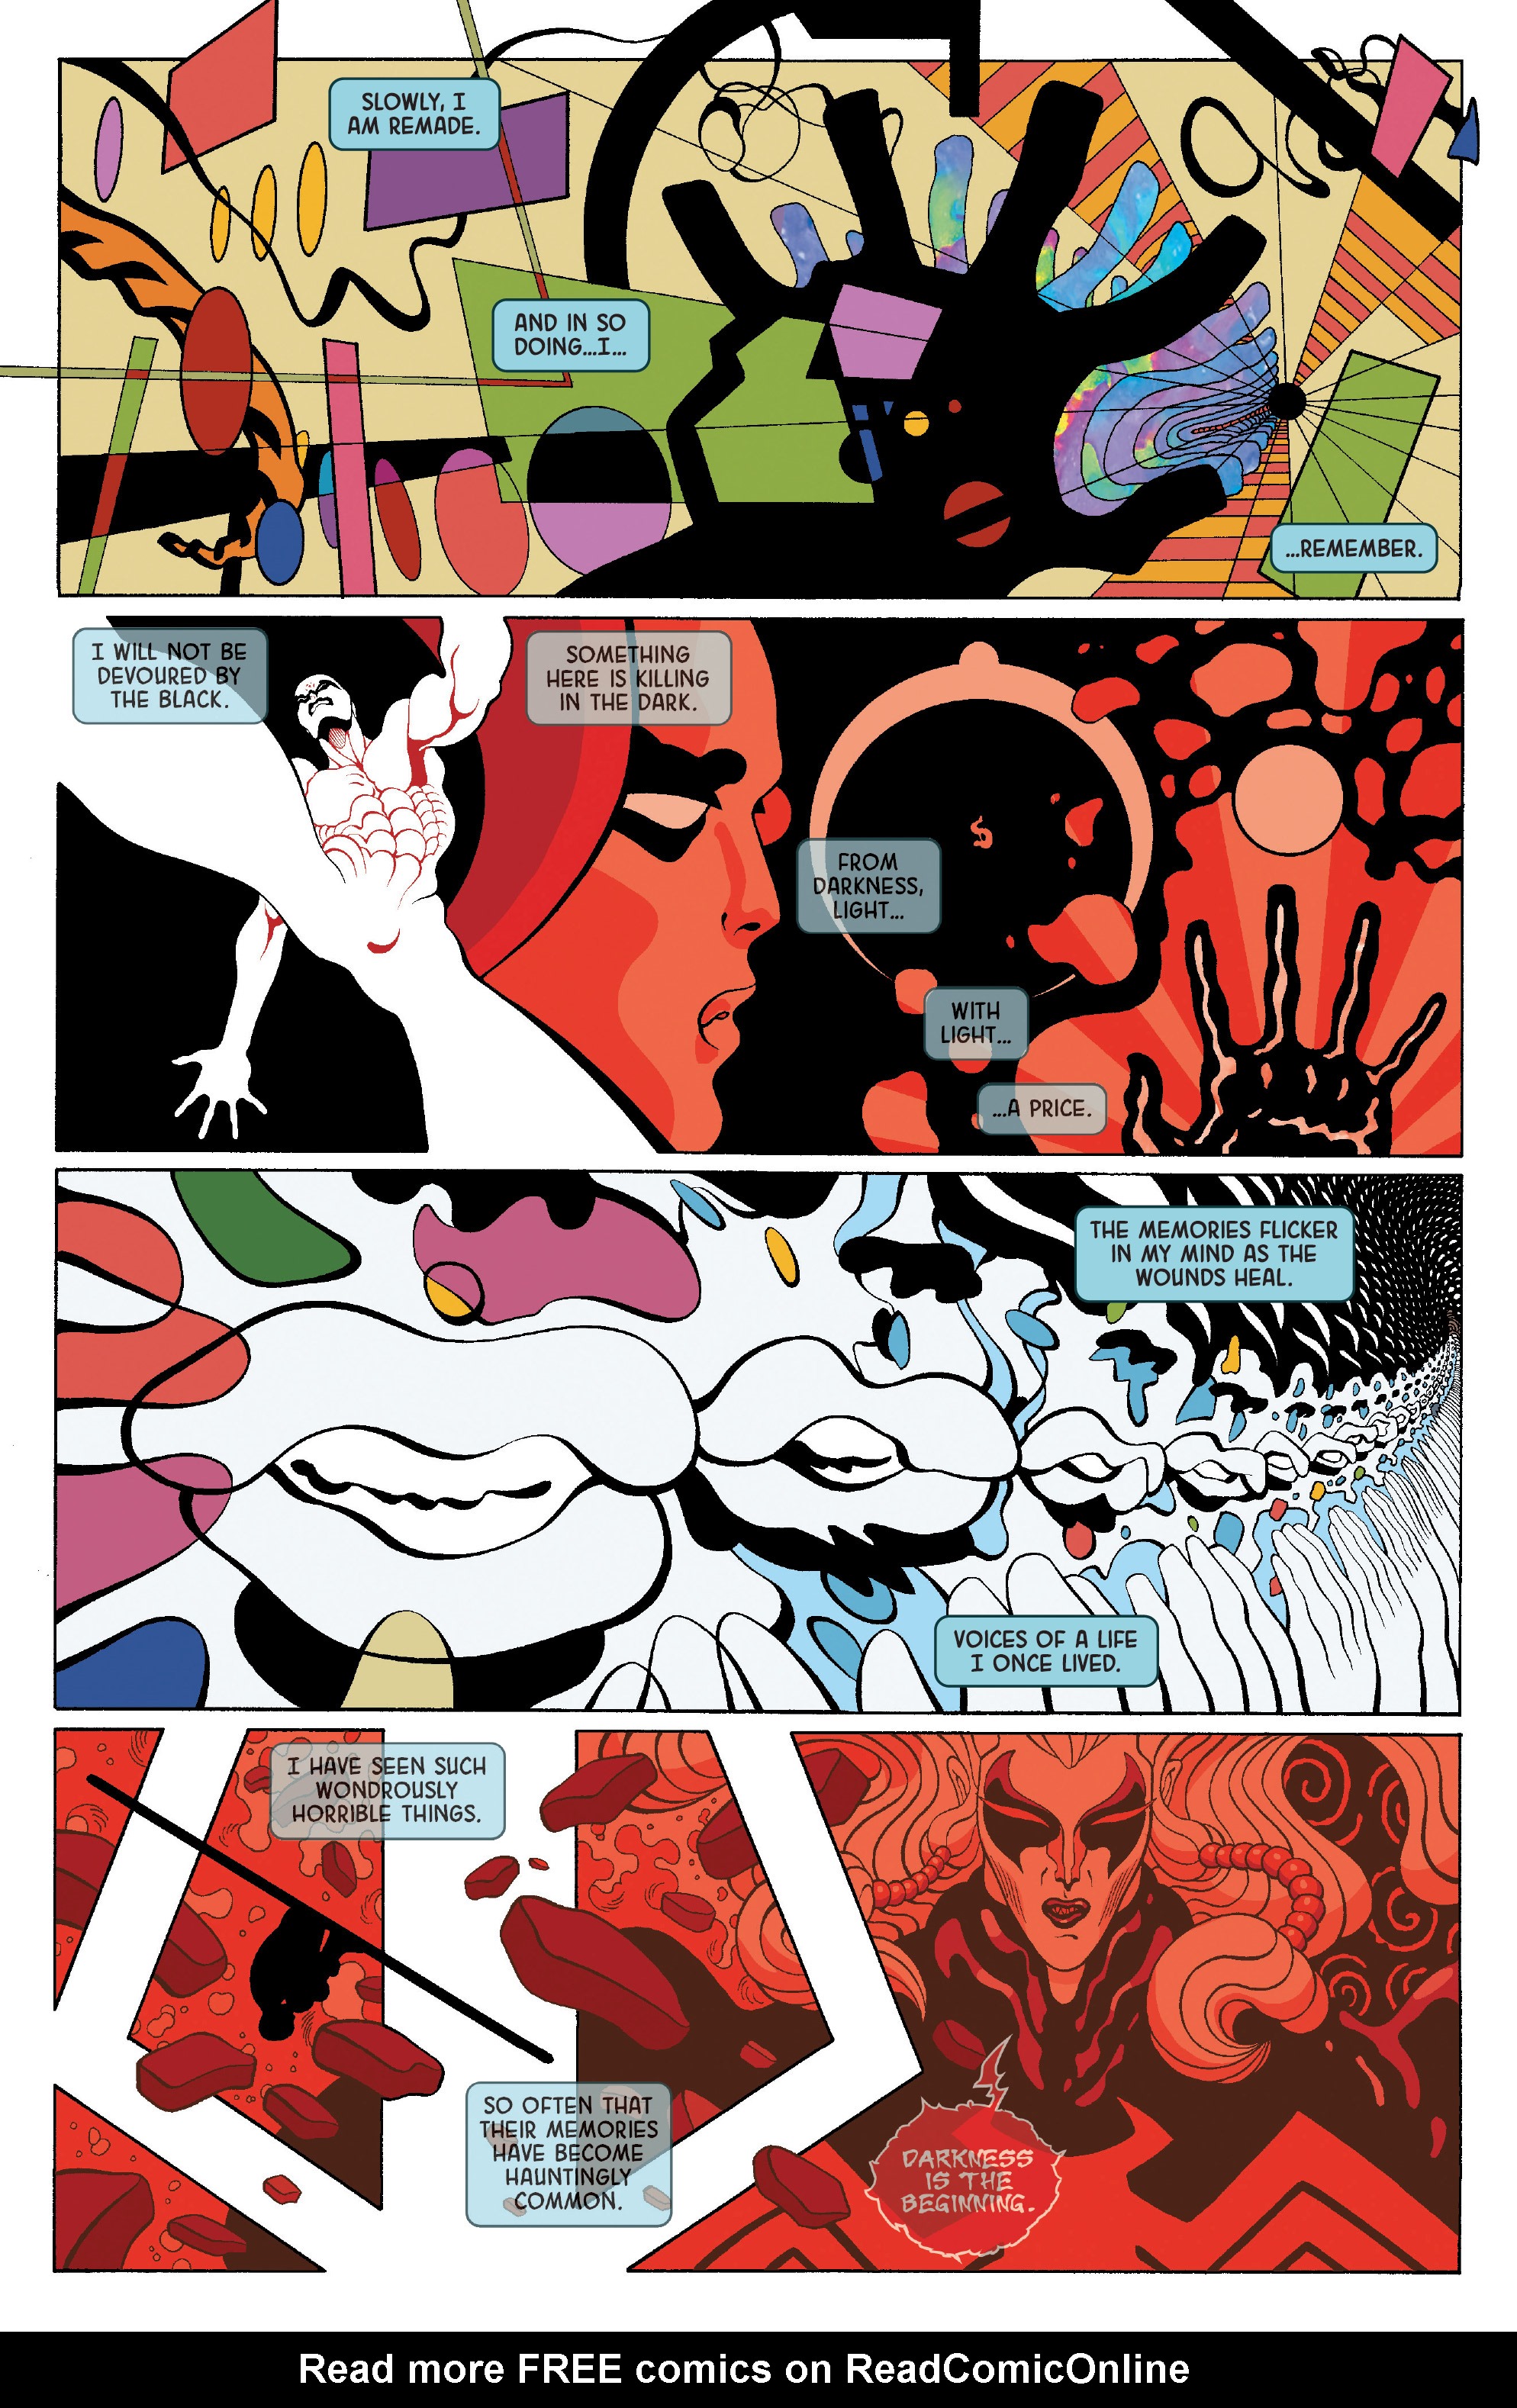 Read online Silver Surfer: Black comic -  Issue #5 - 4